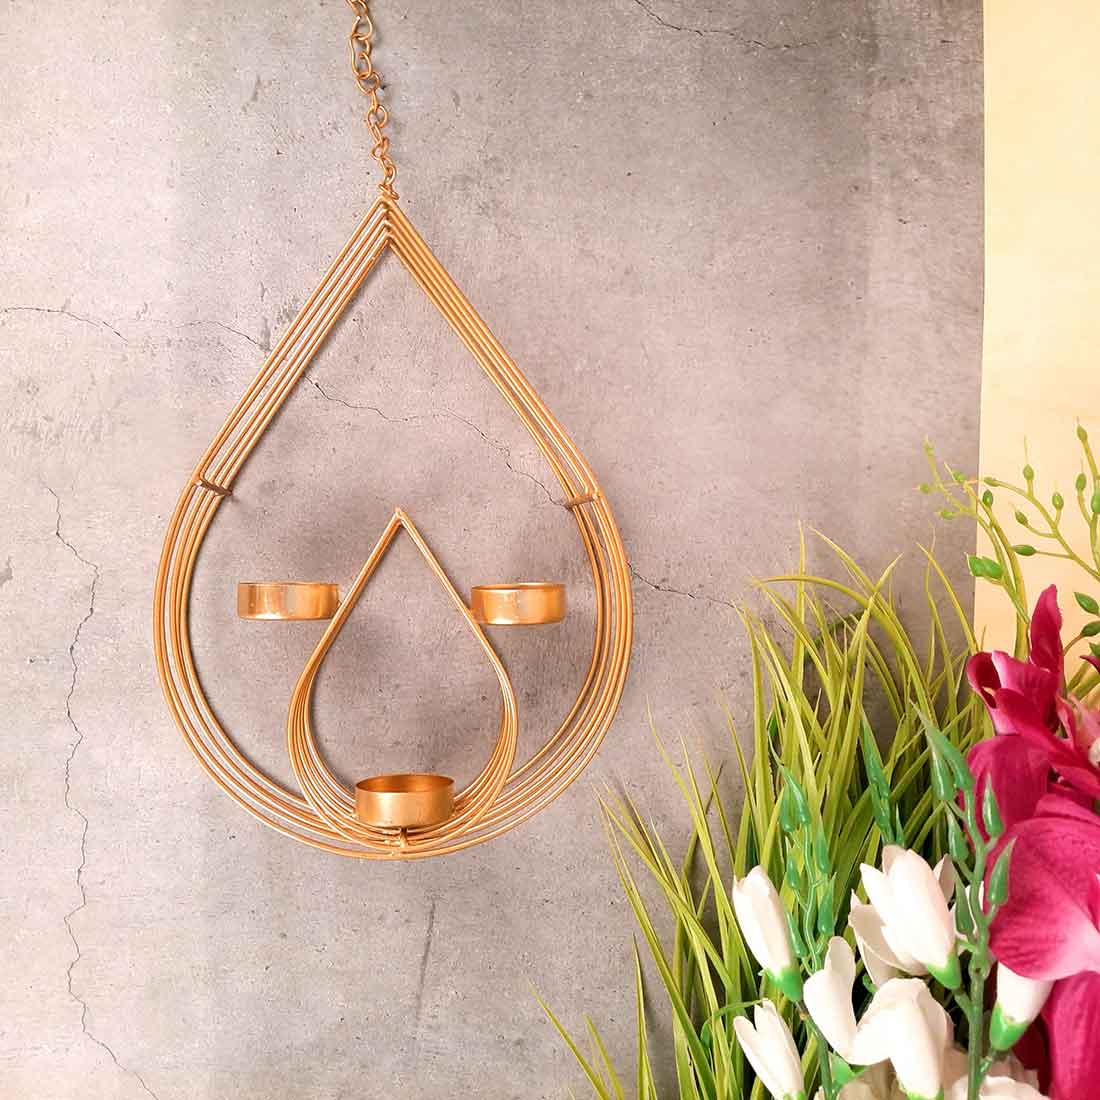 Wall Mount Tea Light Holder | Golden T Light Hanging with 3 T Light Slots - For Wall & Home Decor & Gifts - 22 Inch - Apkamart